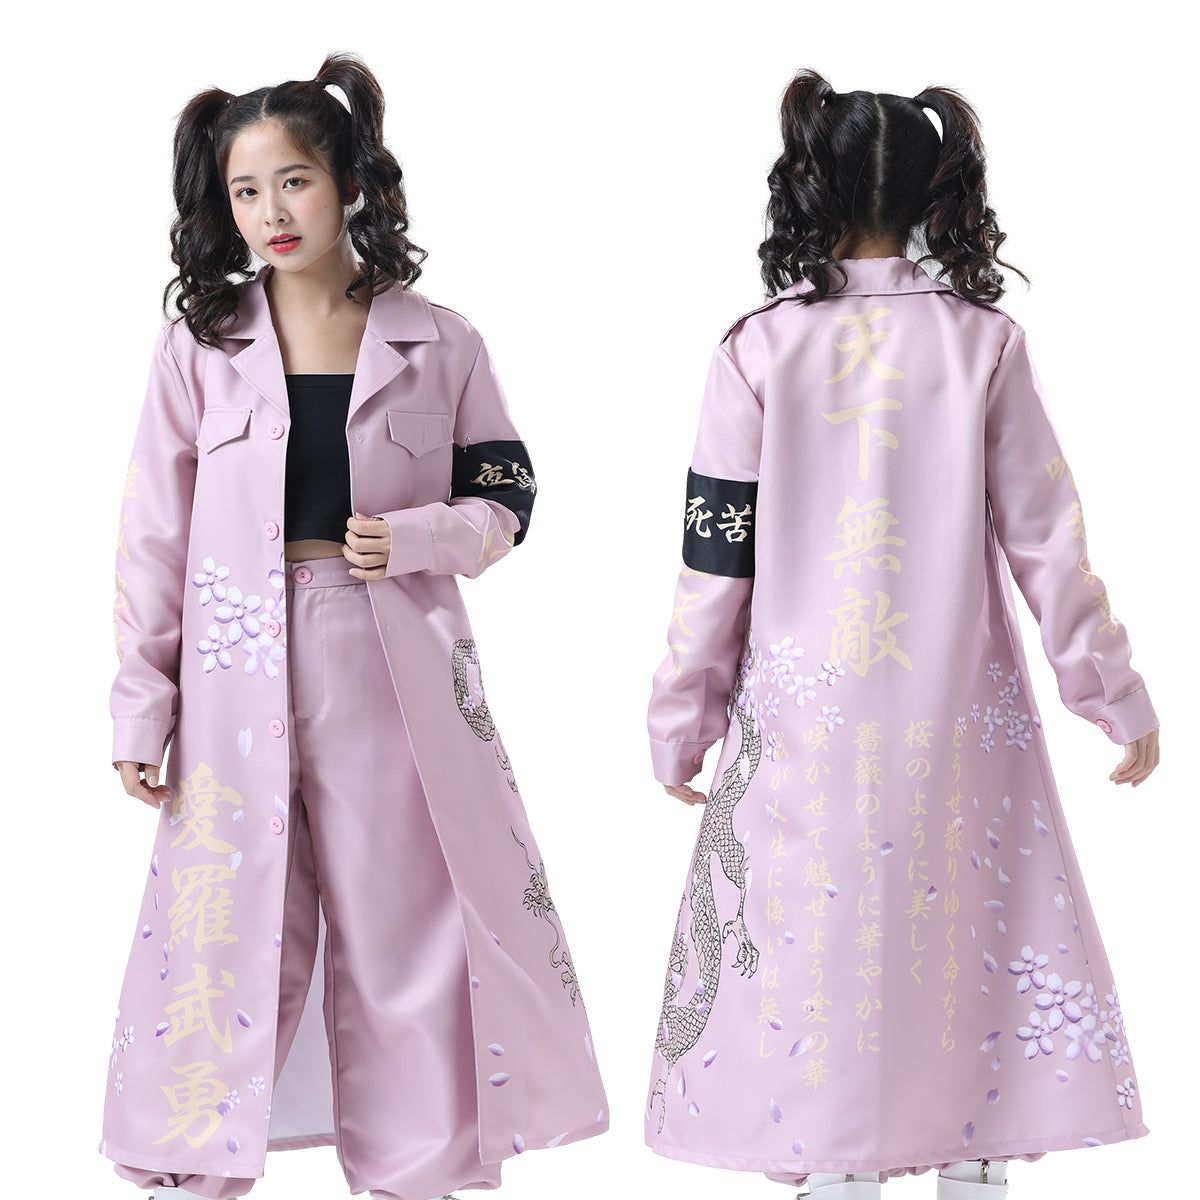 HOLOUN Bosozoku Anime Cosplay Costume Special Attack Uniform Coat Dragon Pattern Chinese Characters Invincible In The World Black White Red Green Purple Pink 6 Colors Halloween